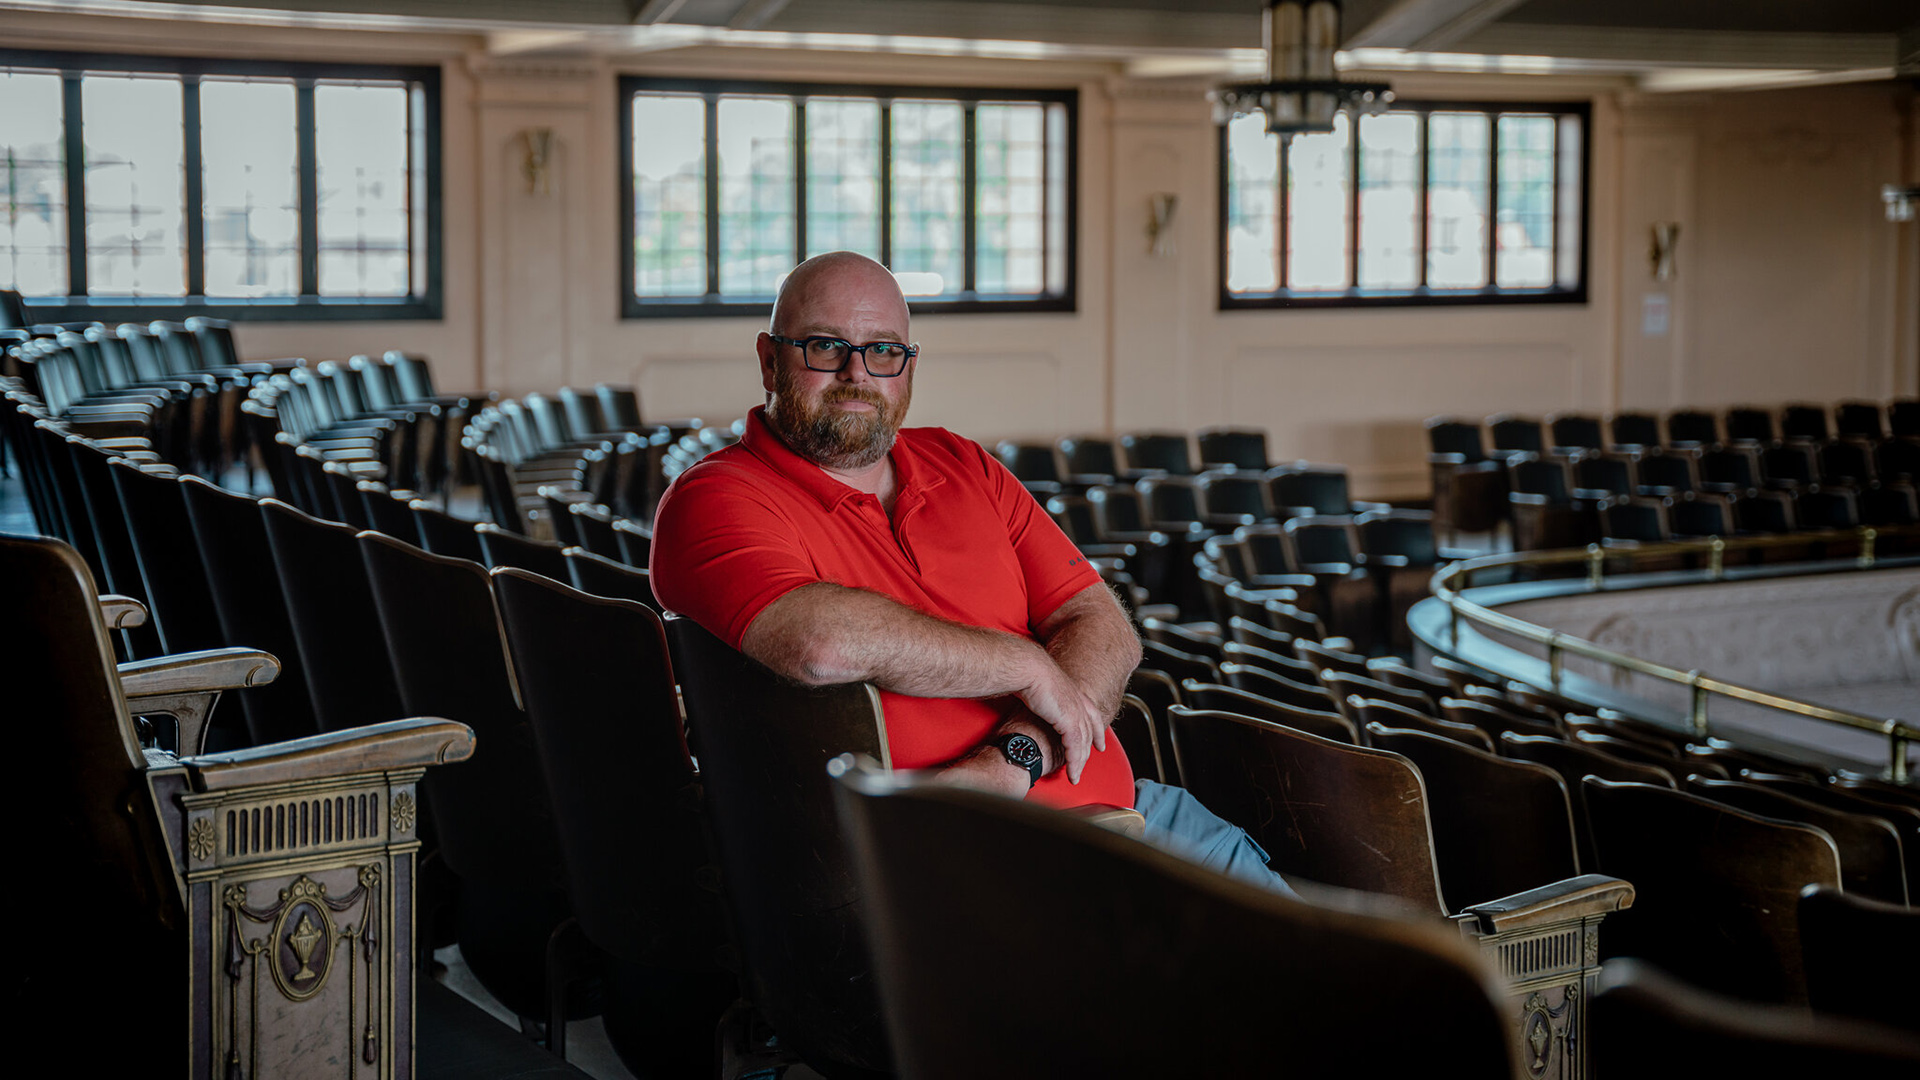 Rohn Bishop poses for a portrait while seated in a wood folding chair at the end of a row of chairs in a curved balcony seating section of a multi-story room, with windows in the background.